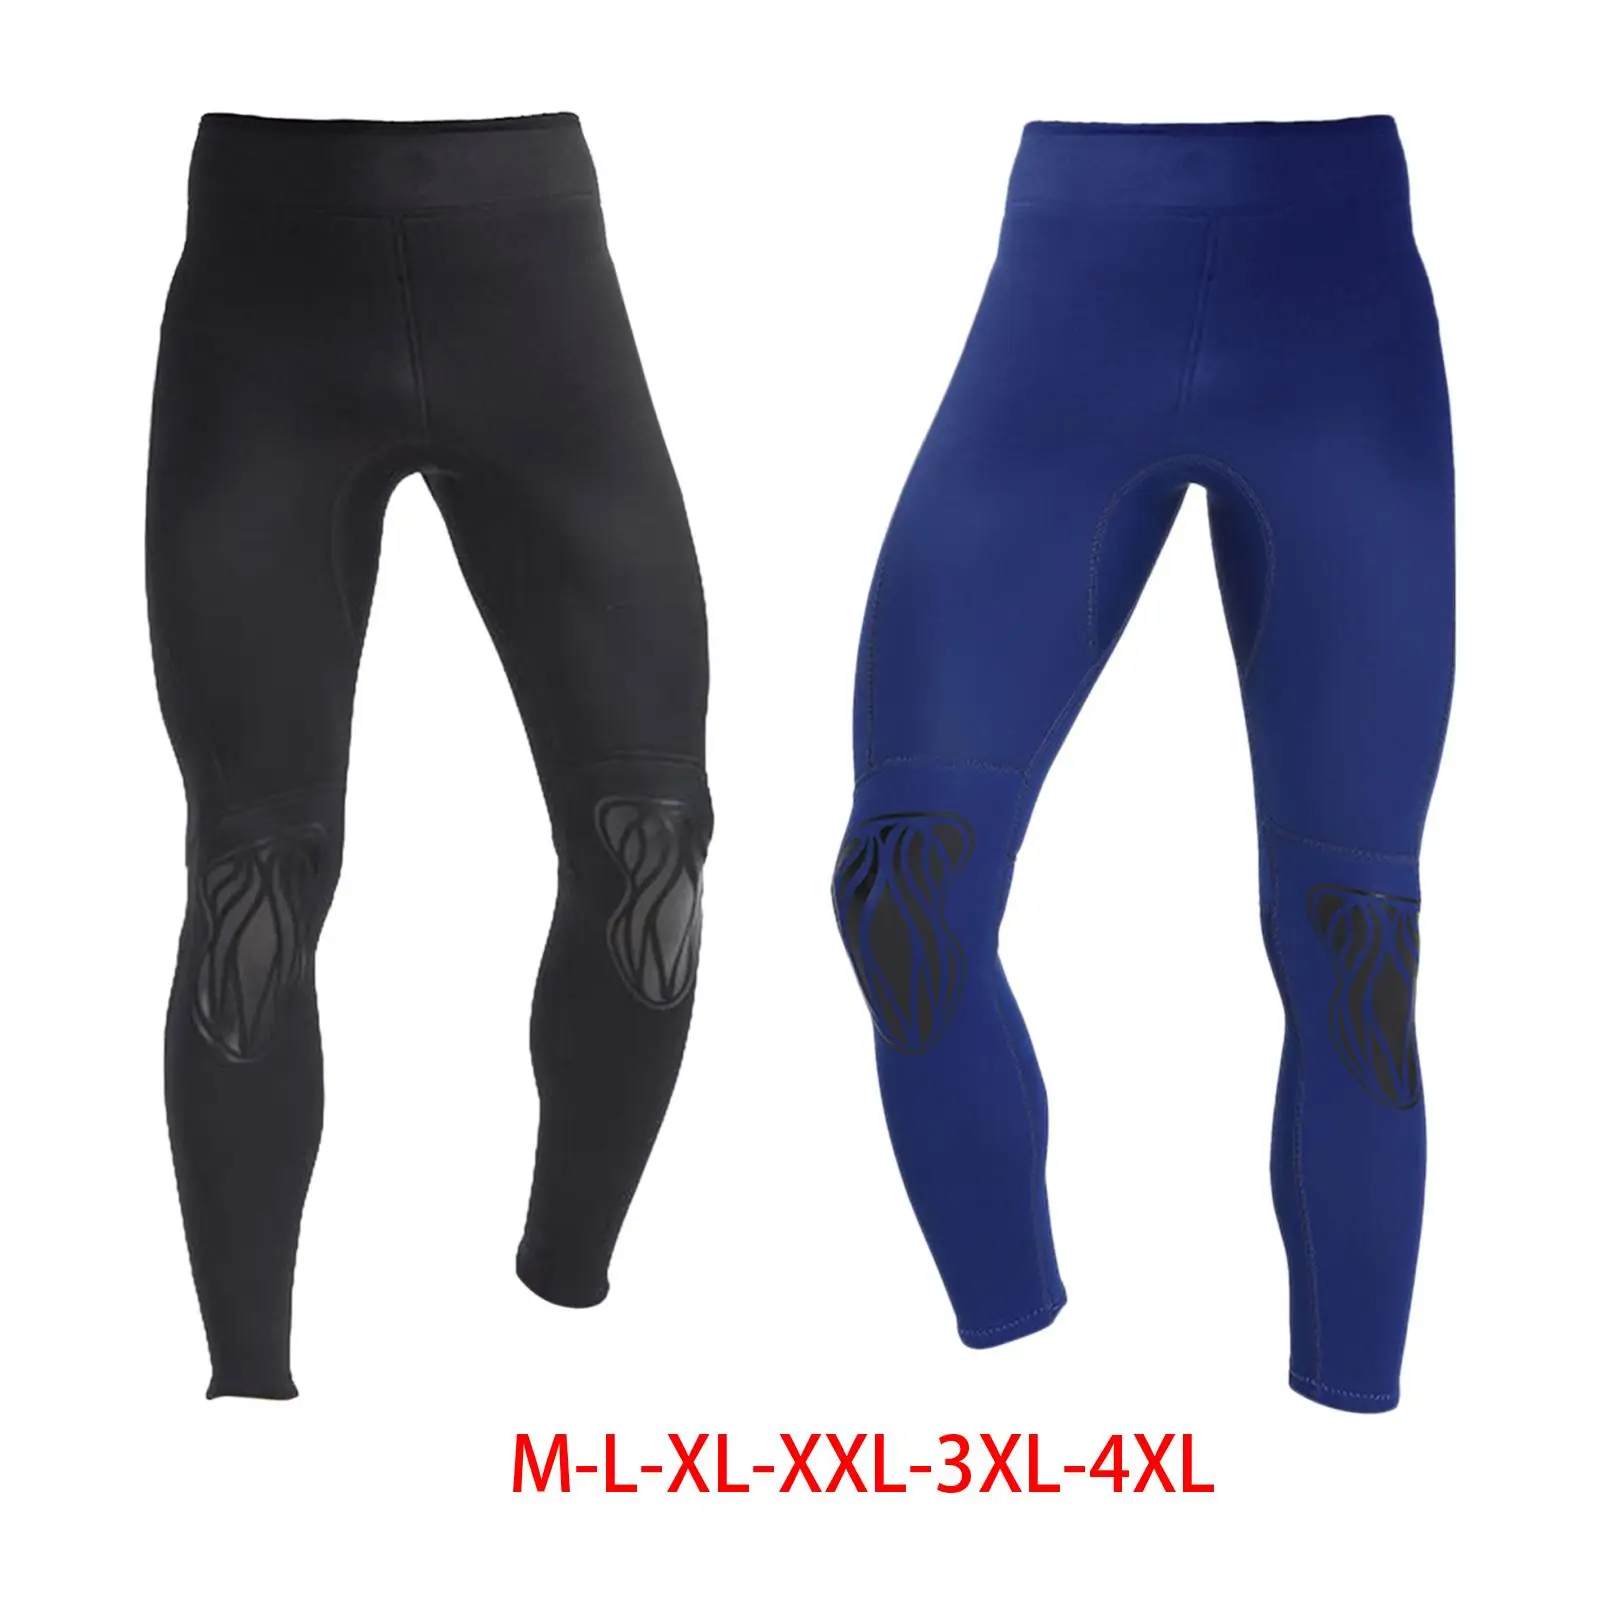 Adults Wetsuits Pants 3mm Neoprene Pants Sun Protection for Snorkeling